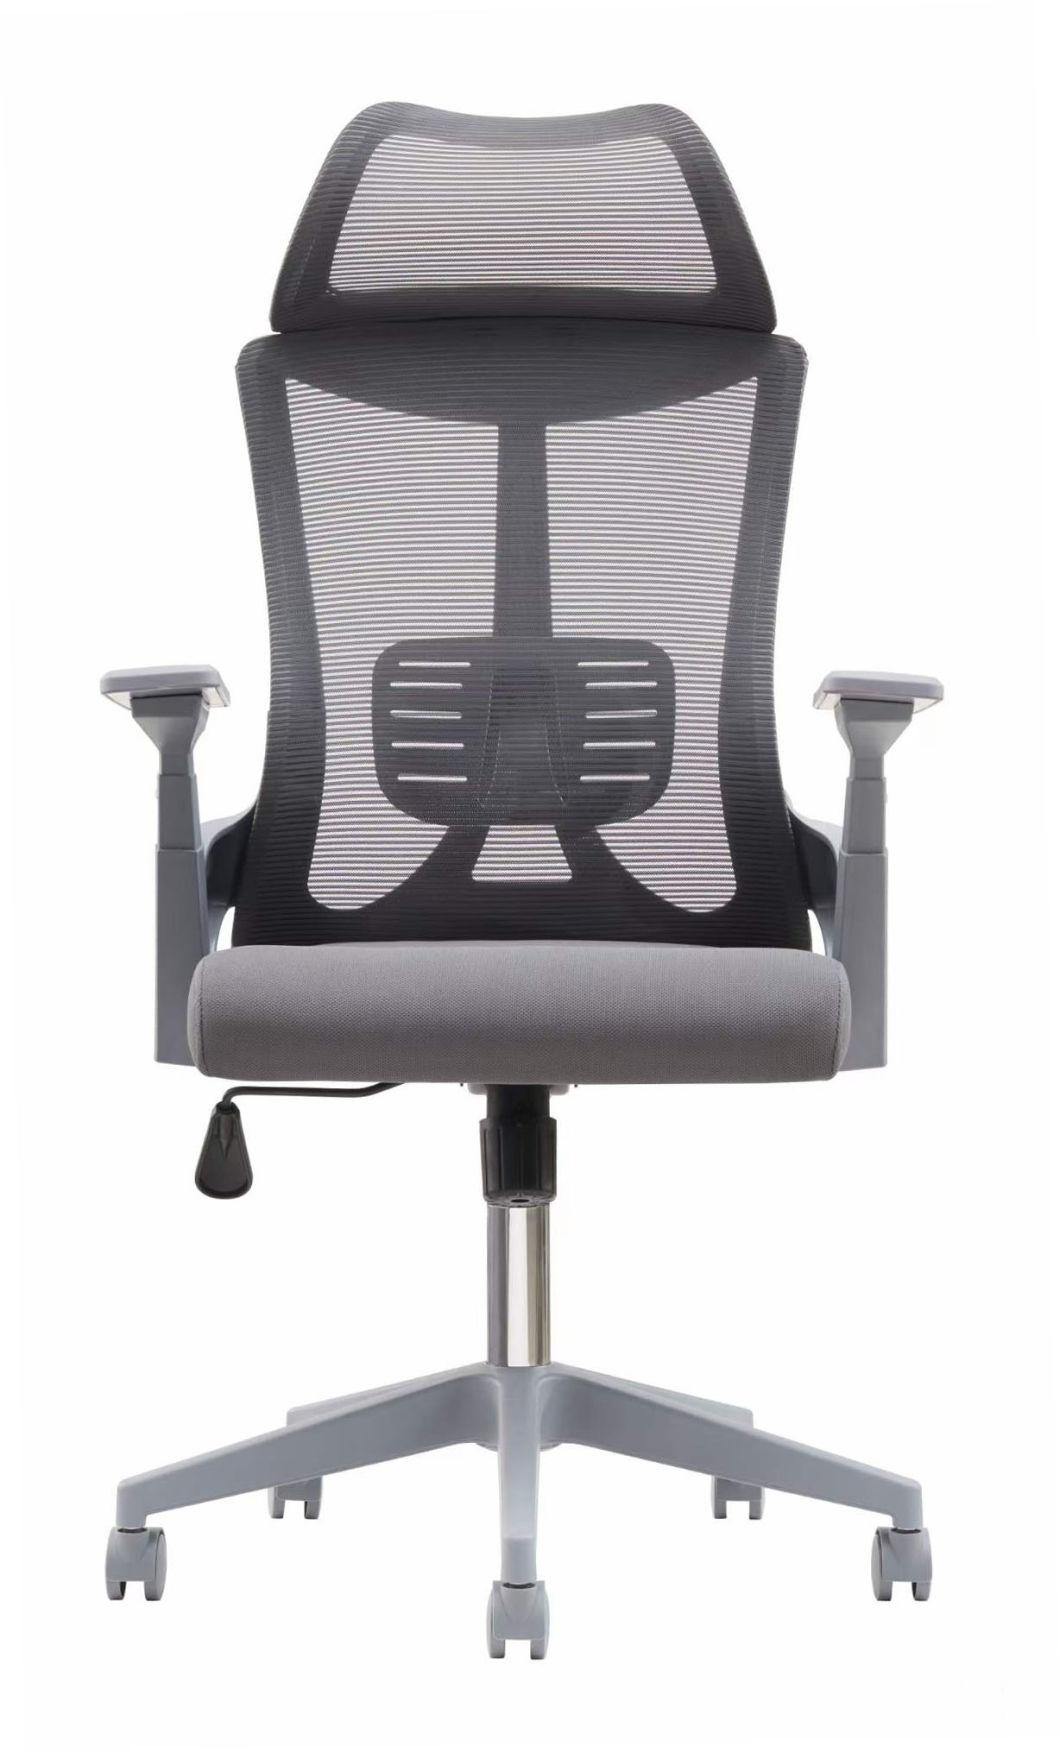 New Arrival Home Office Adjustable Armrest Executive Swivel Computer Chair